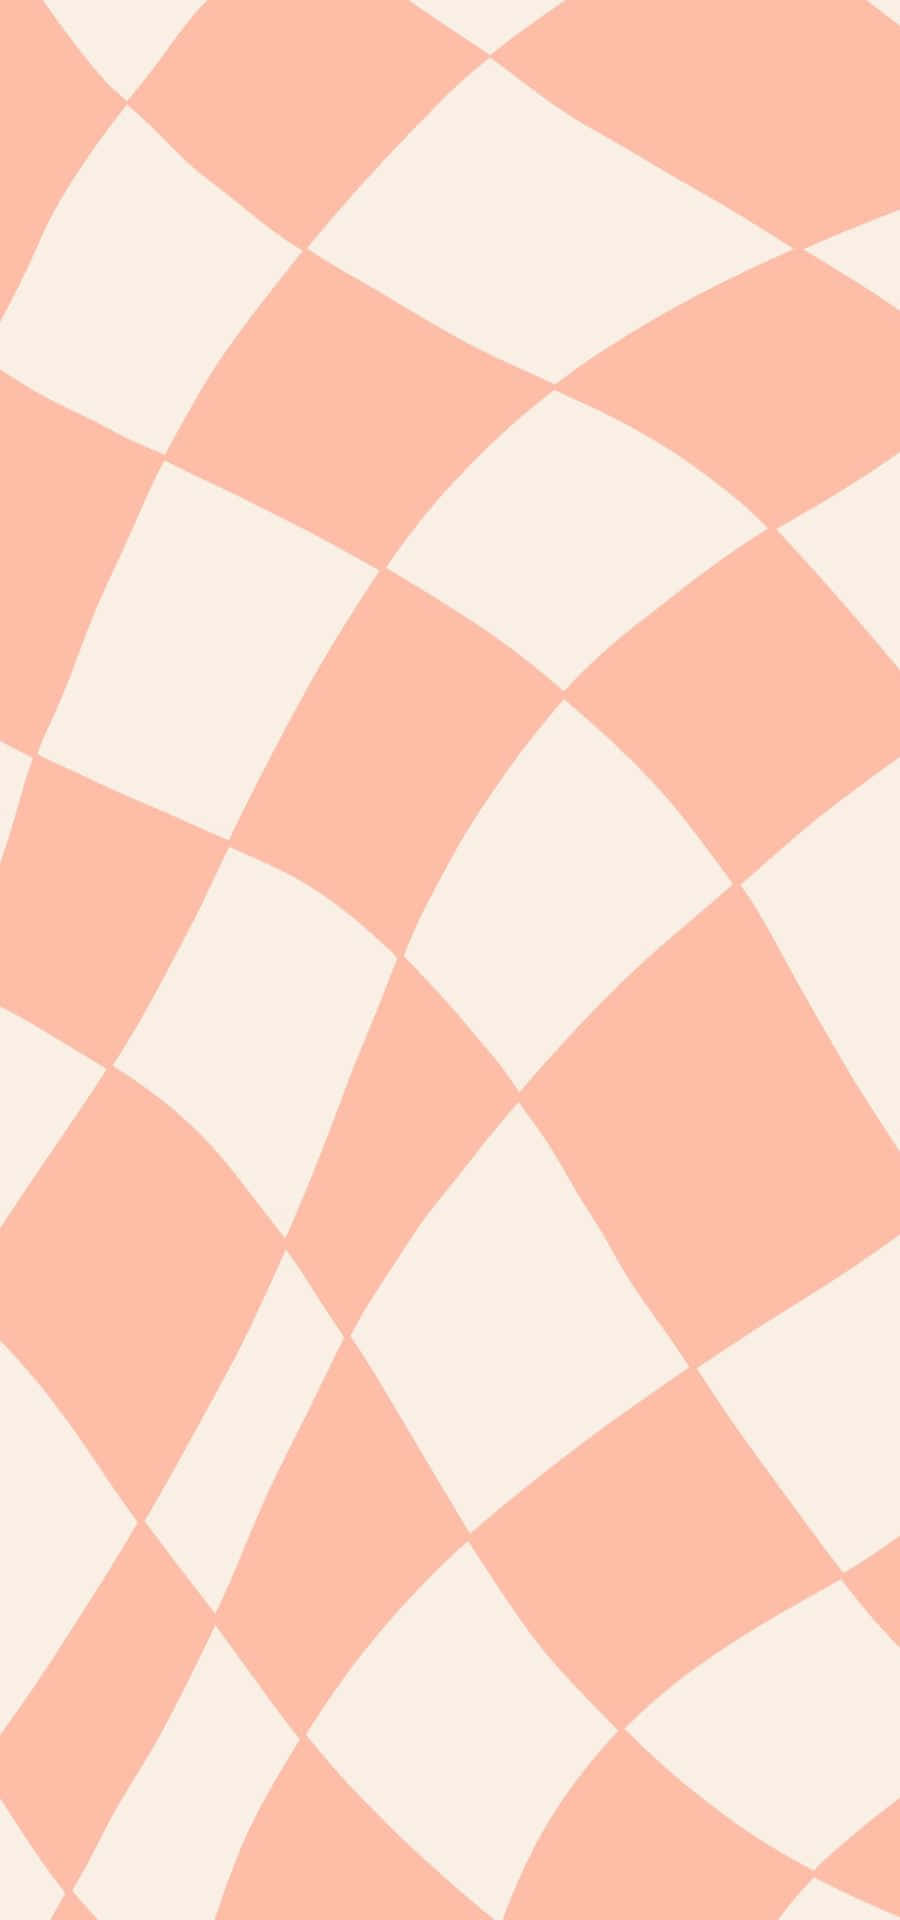 Lush Peach Background to Brighten up Your Day